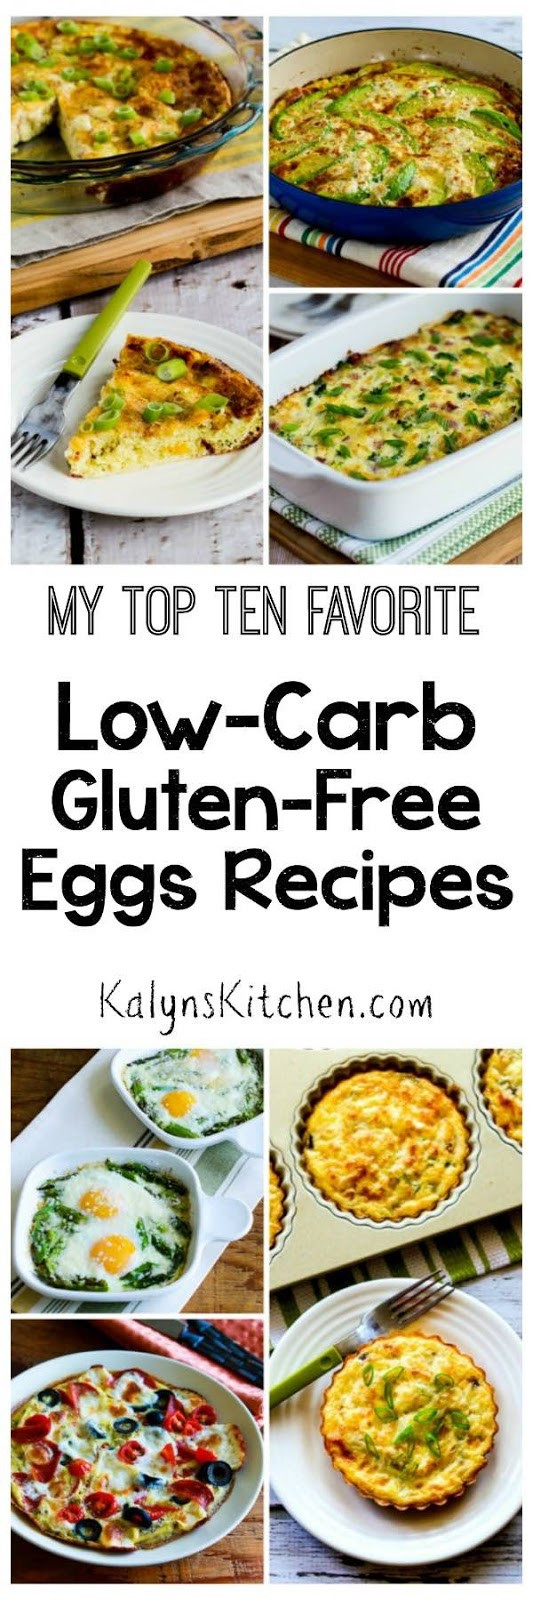 Gluten Free Low Carb Recipes
 My Top Ten Favorite Low Carb and Gluten Free Eggs Recipes